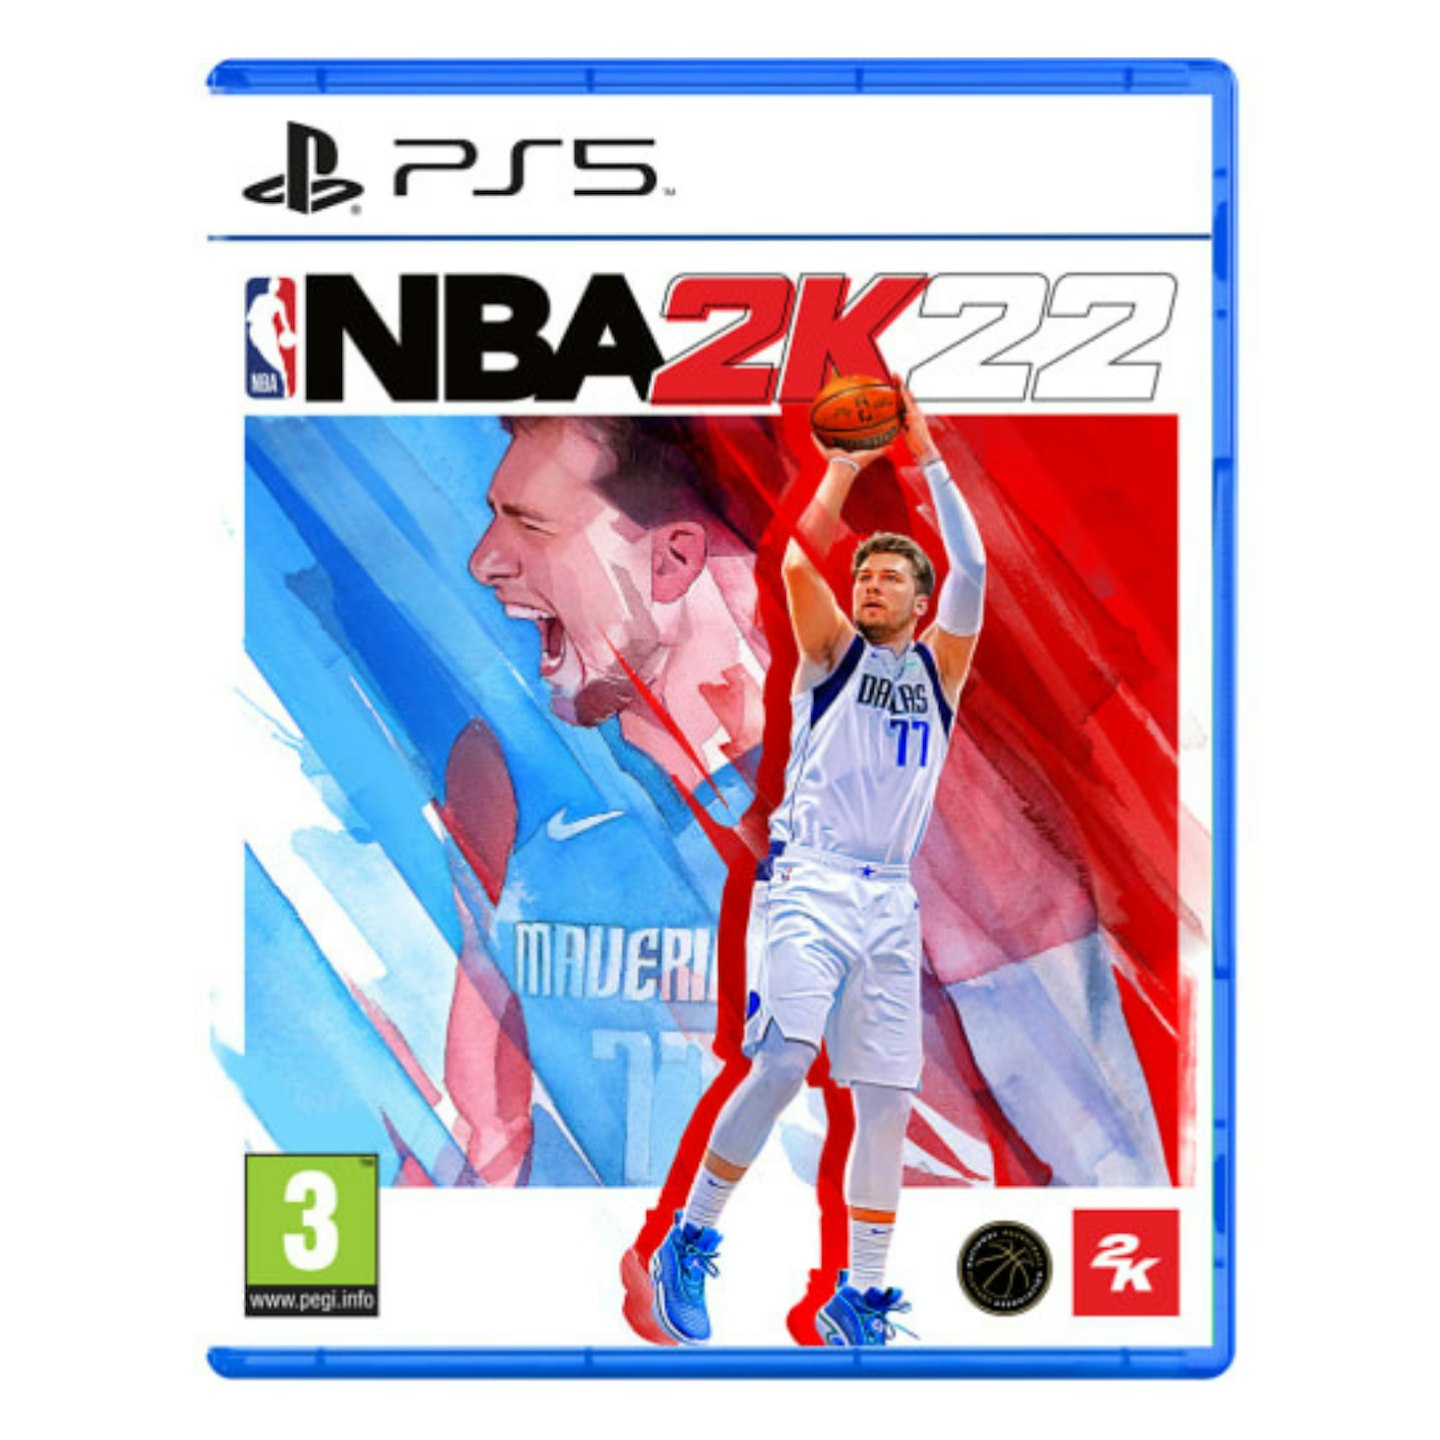 NBA 2K22 With GAME Exclusive Pre-order Bonuses - PS5